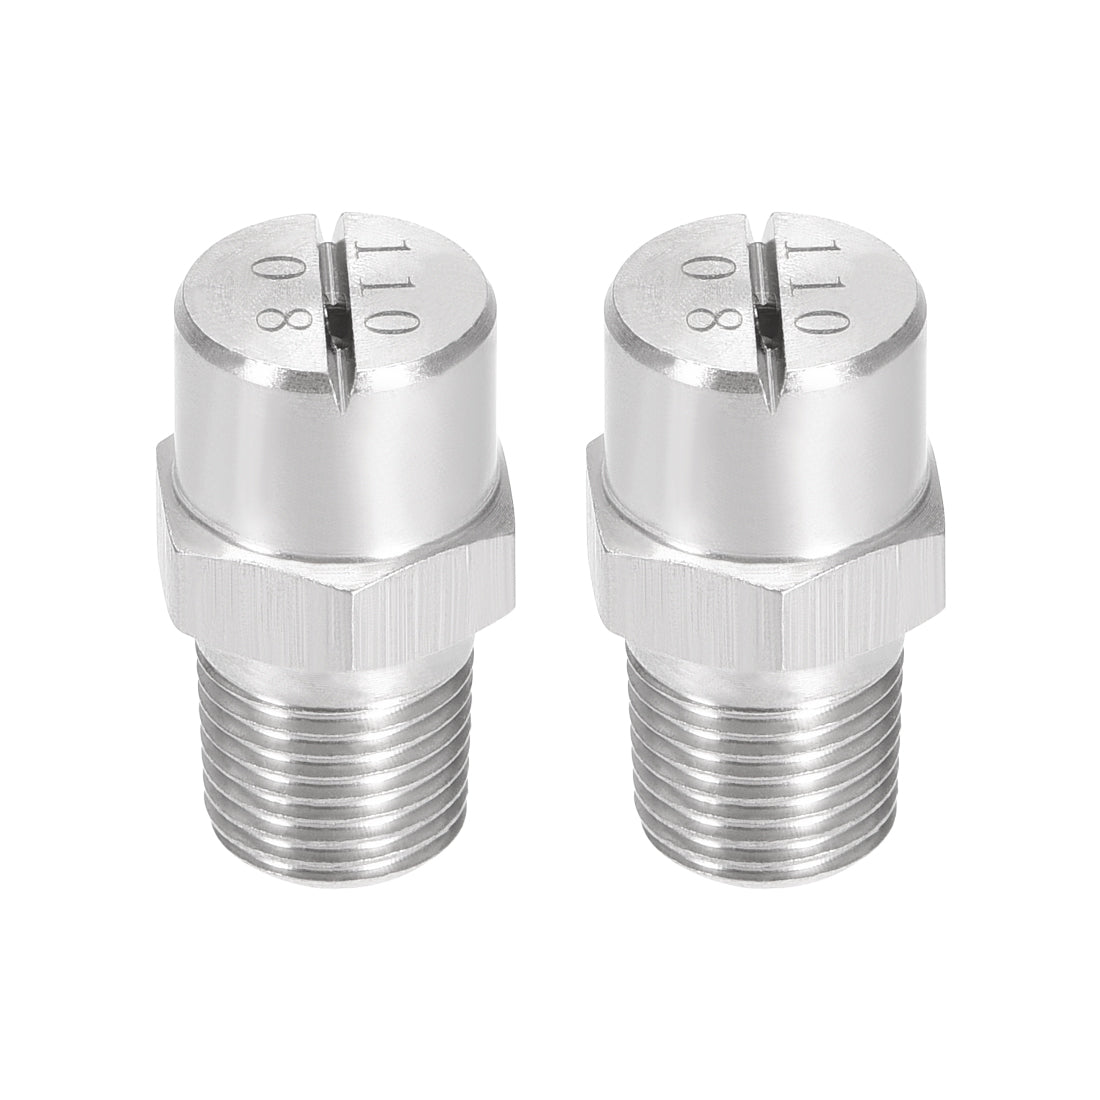 Uxcell Uxcell Flat Fan Spray Tip - 1/8BSPT Male Thread 304 Stainless Steel Nozzle - 110 Degree 2mm Orifice Diameter - 2 Pcs